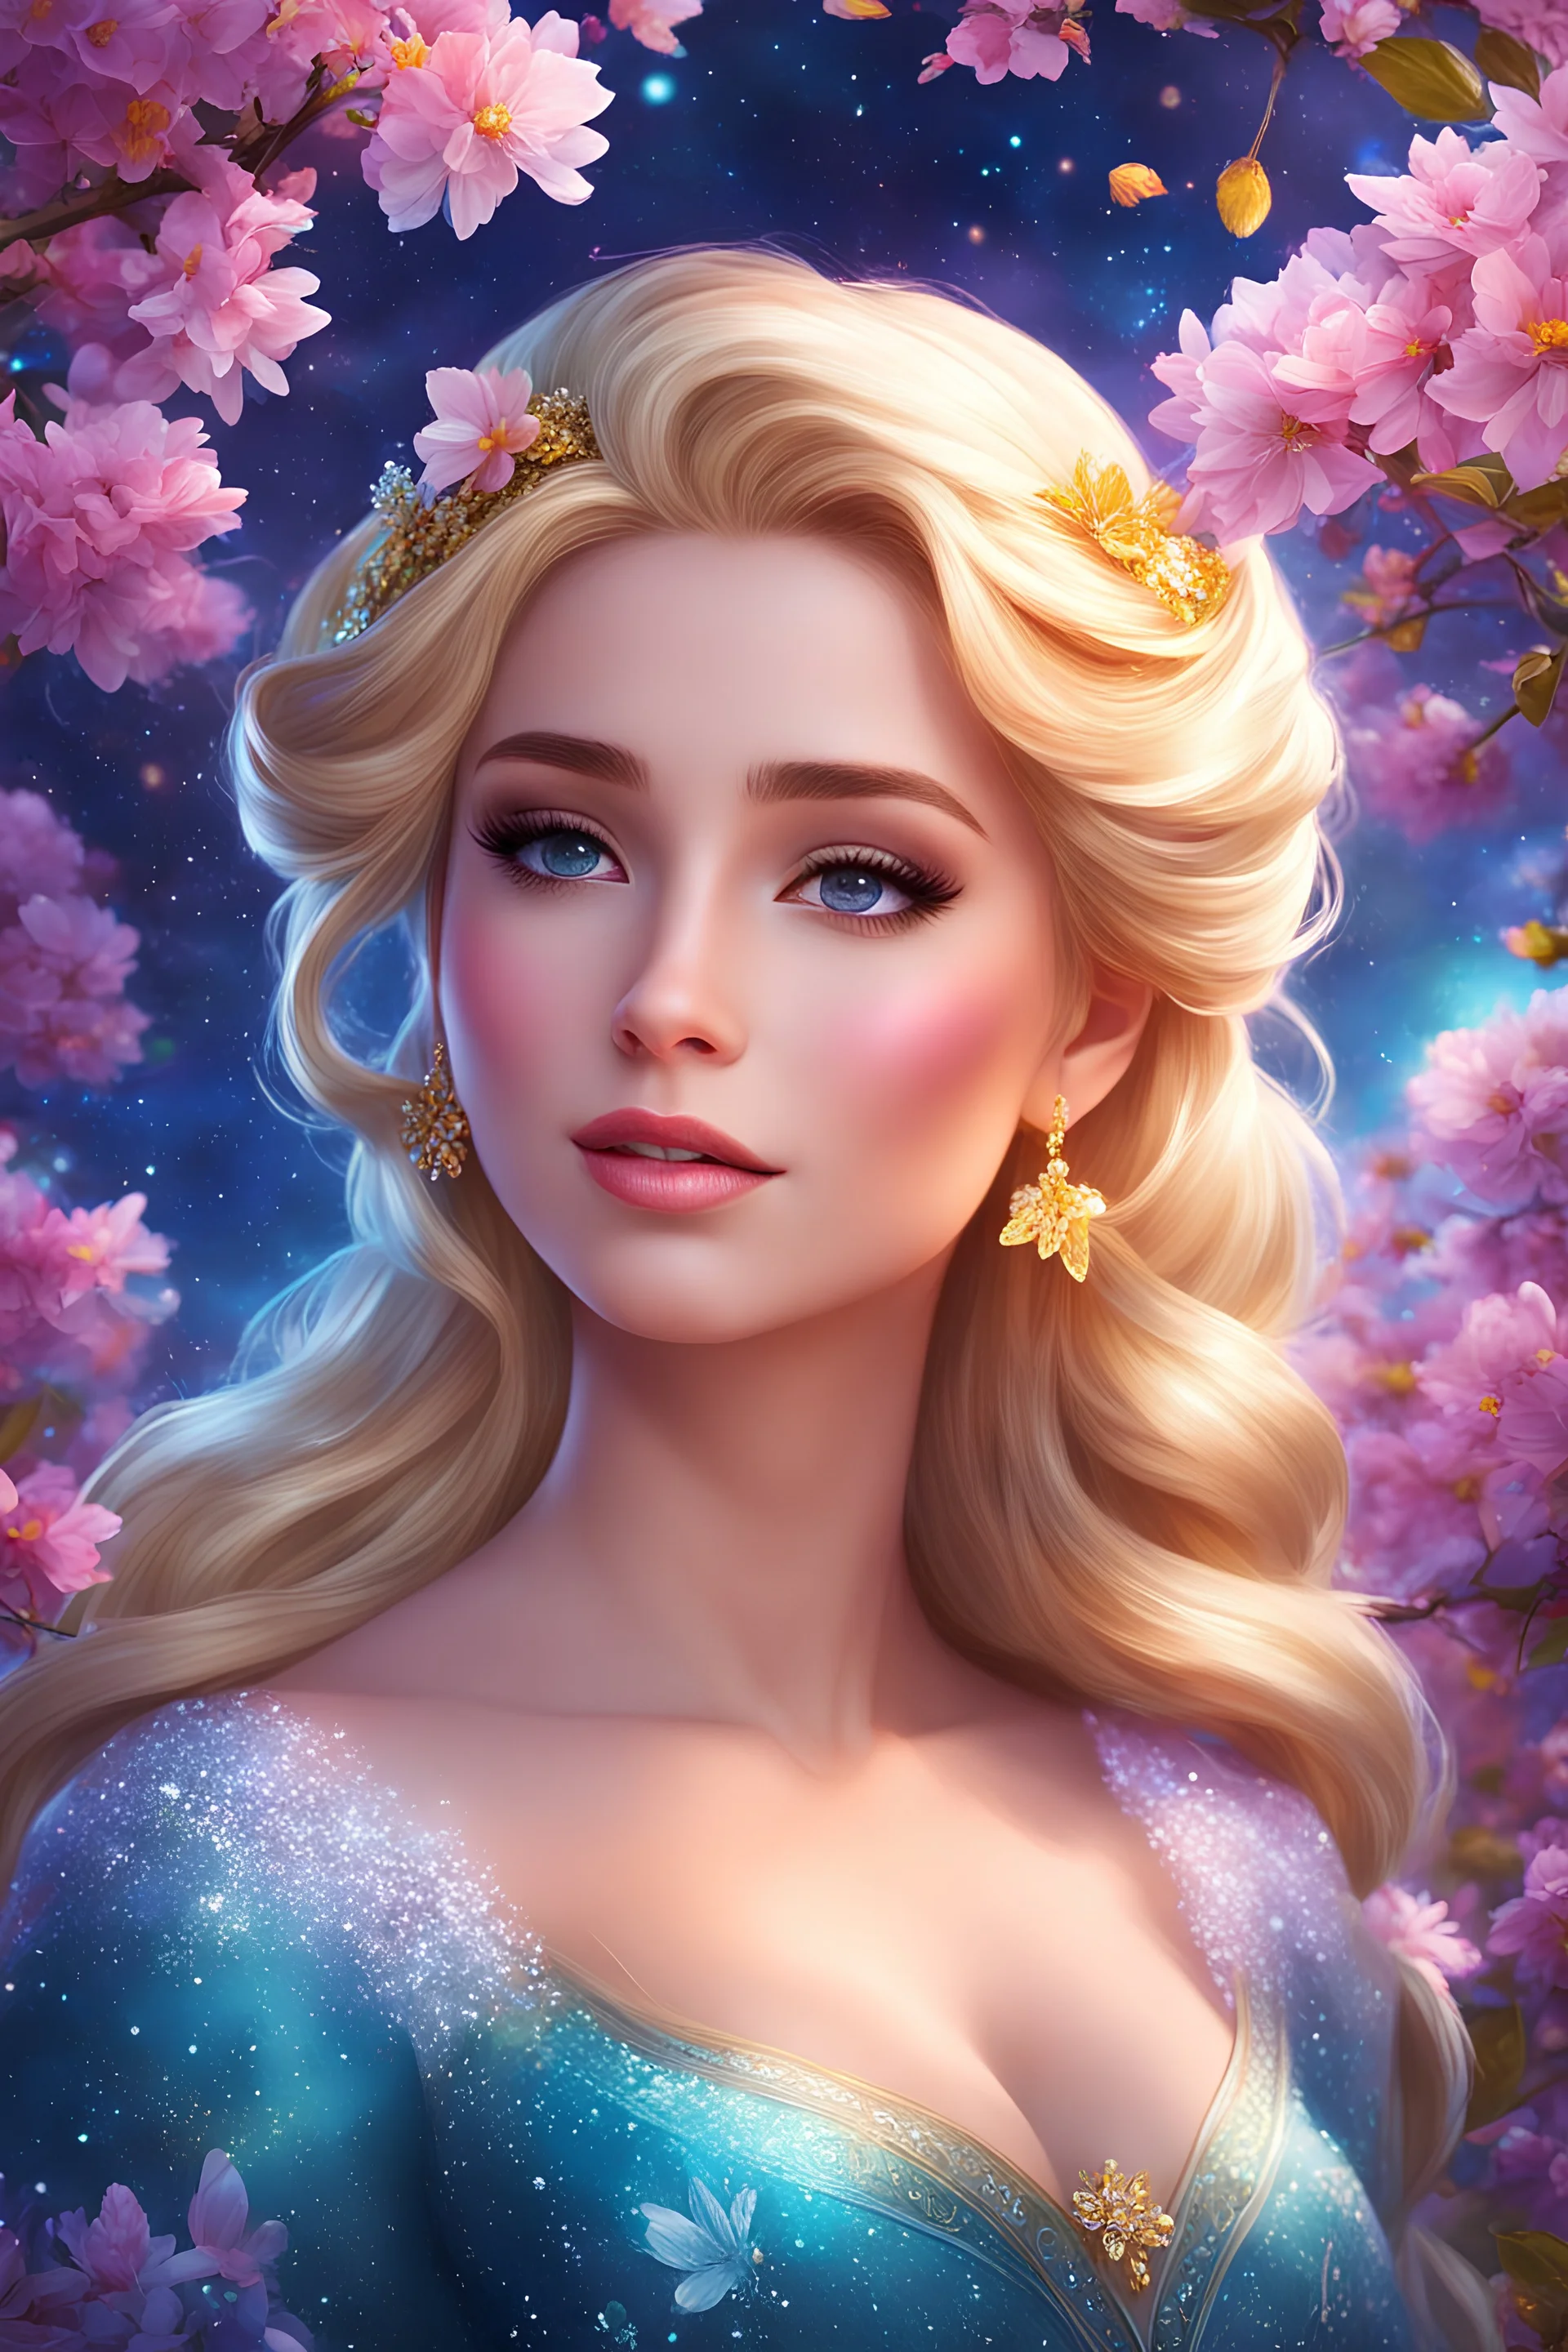 As the night sky casts its dreamy gaze upon Elsa, amidst the vibrant blossoms of spring, her blonde locks shimmer like a golden halo. highly detailed, digital art, beautiful detailed digital art, colorful, high quality, 4k